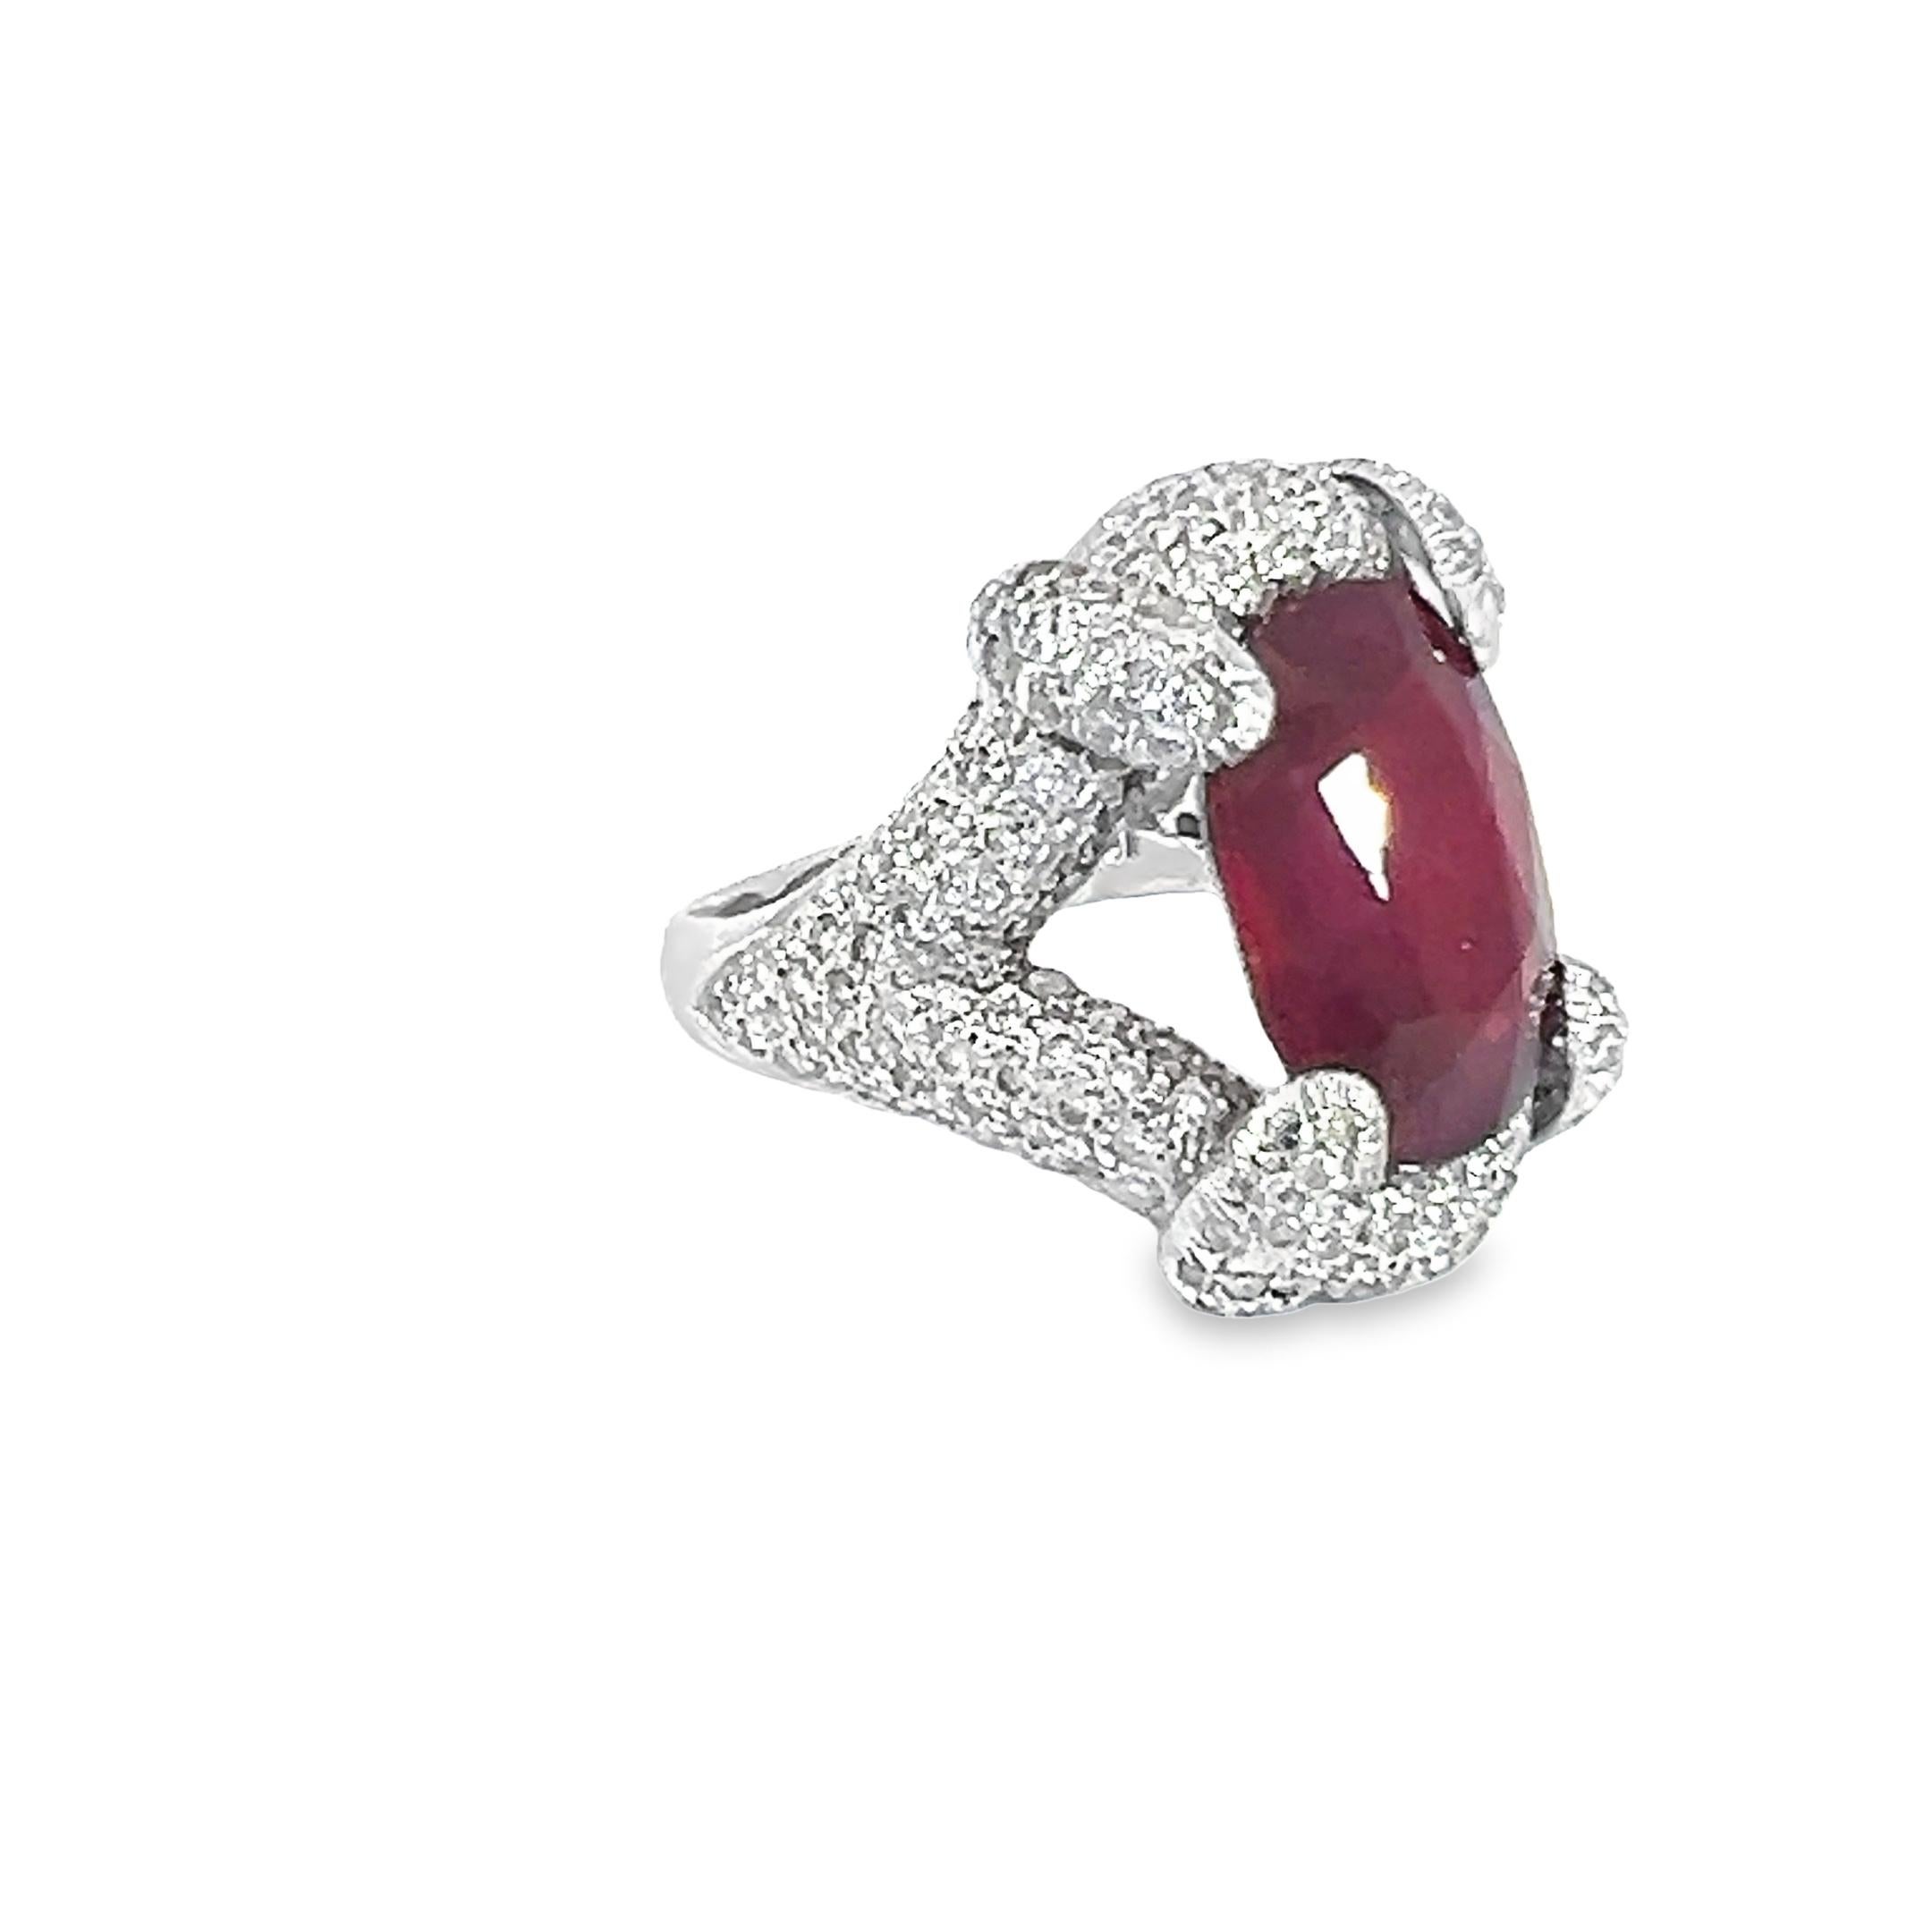 A beautiful natural glass filled Ruby Diamond ring set in 18Kt gold For Sale 4